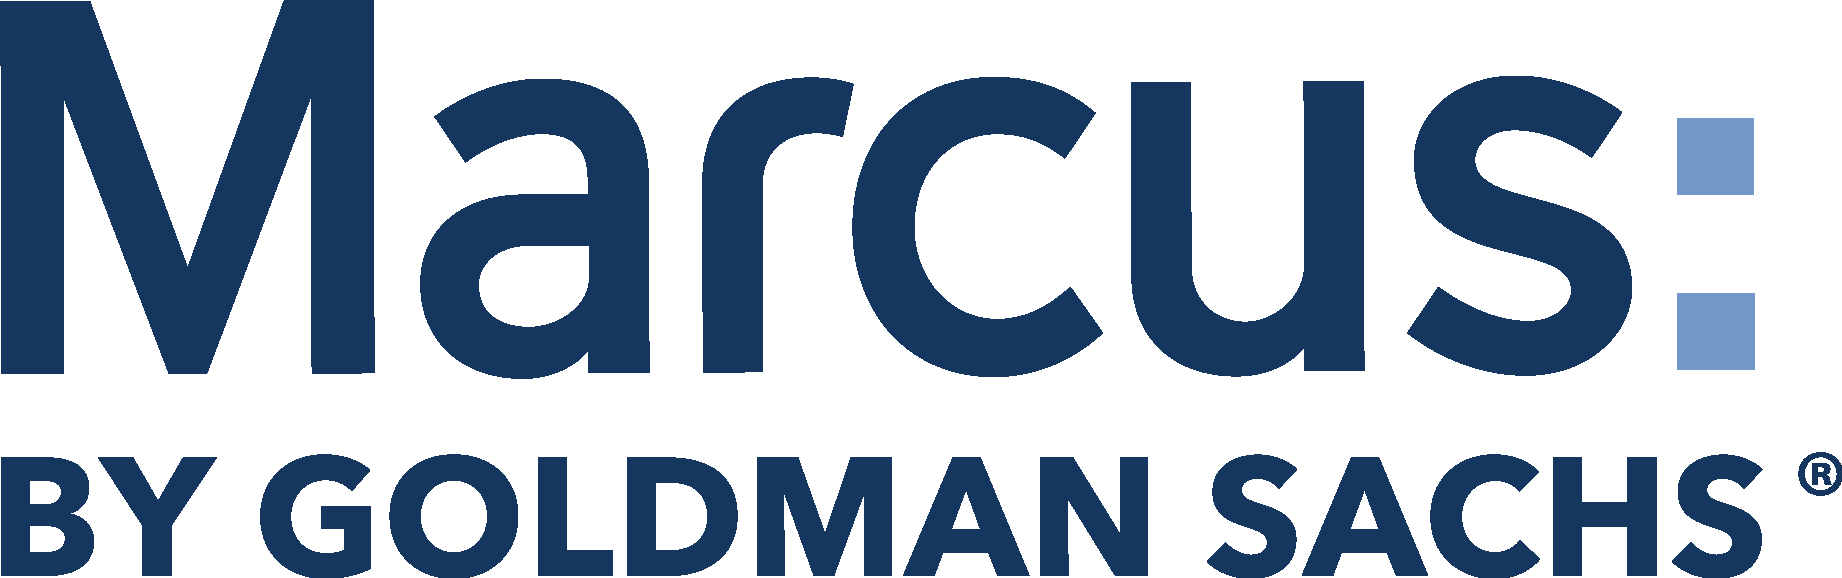 Download Neiman Marcus Logo in SVG Vector or PNG File Format